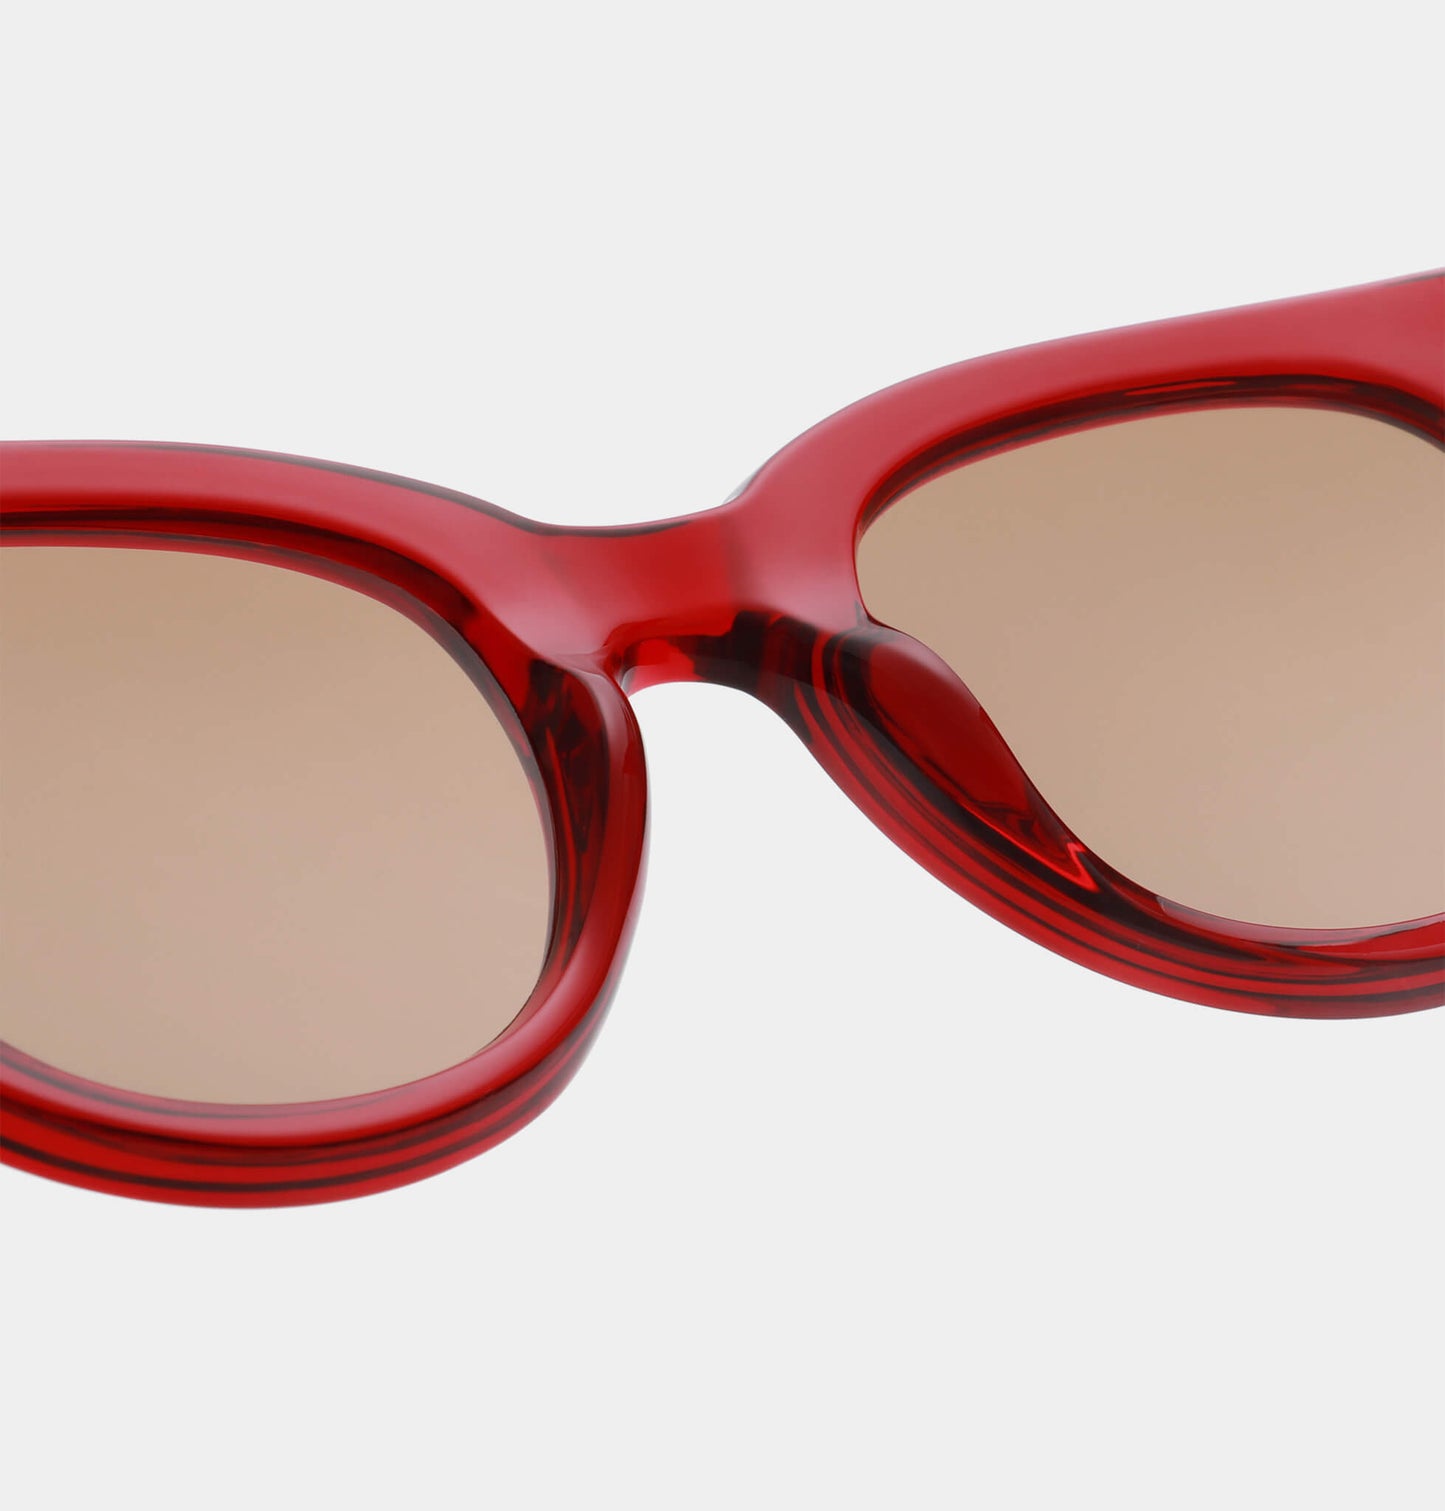 A.Kjaerbede Lilly Sunglasses in Red Transparent